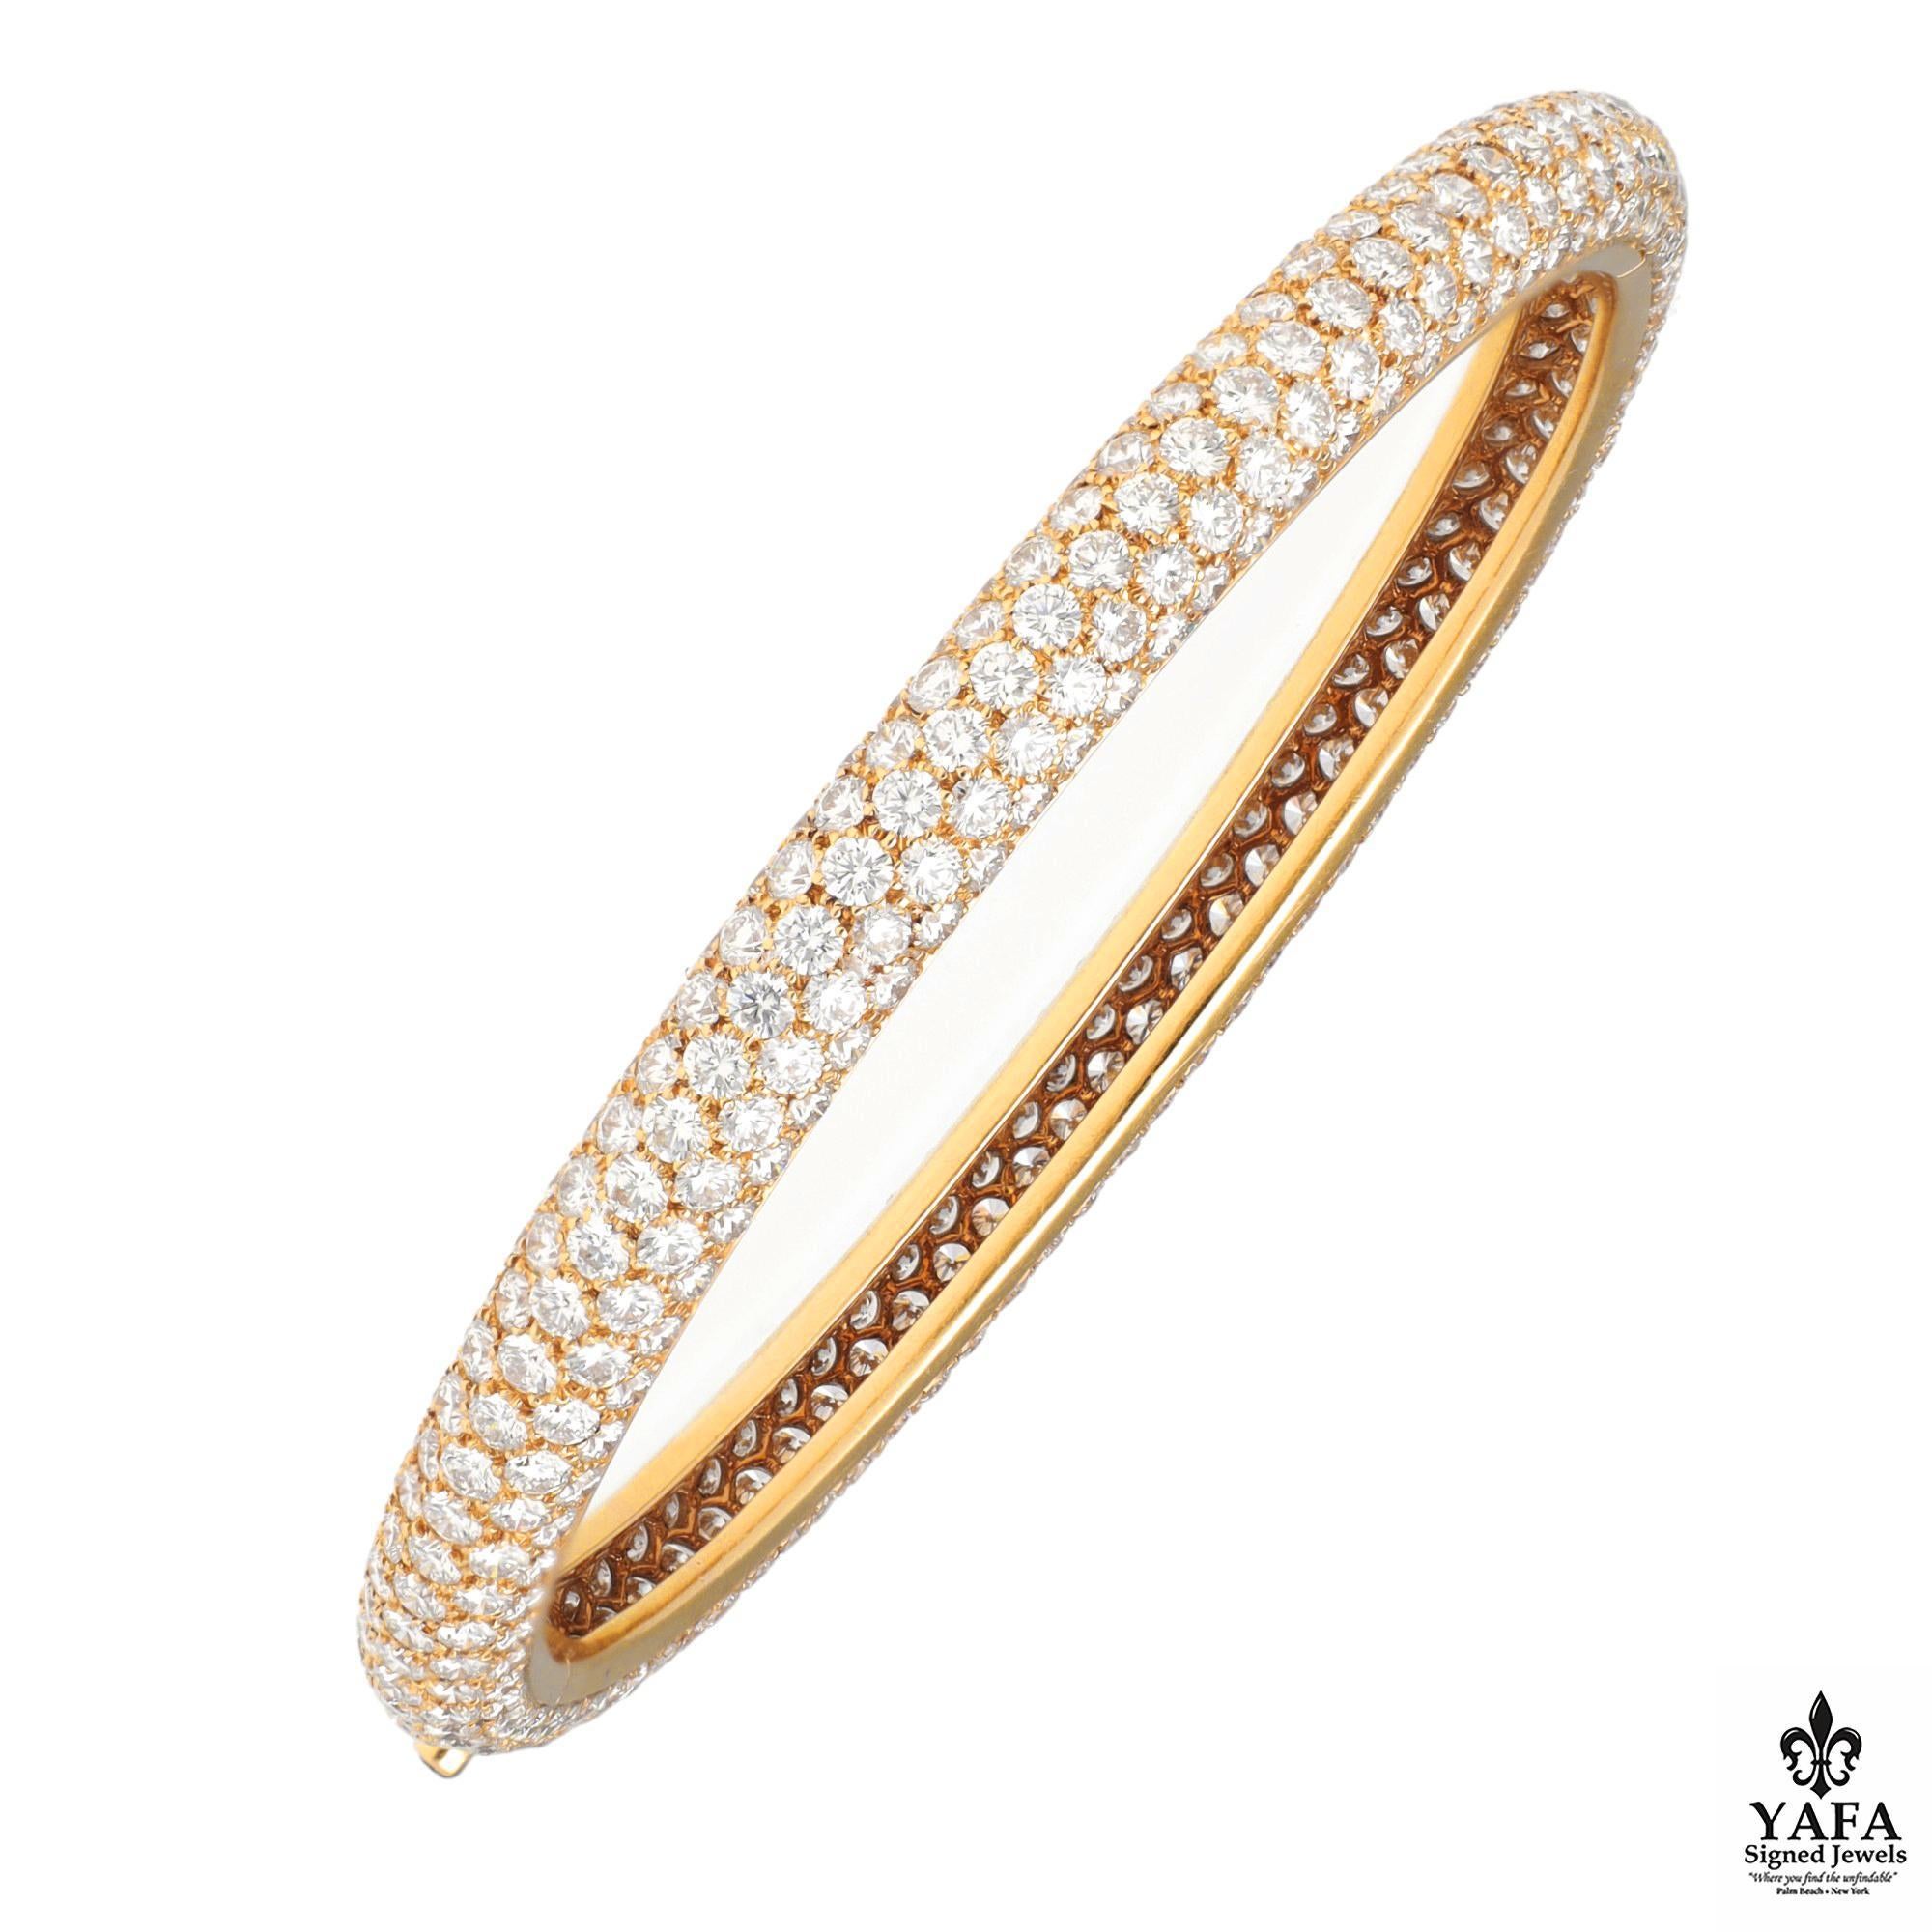 Cartier 18K Yellow Gold Diamond Pave Bangle Bracelet In Excellent Condition For Sale In New York, NY